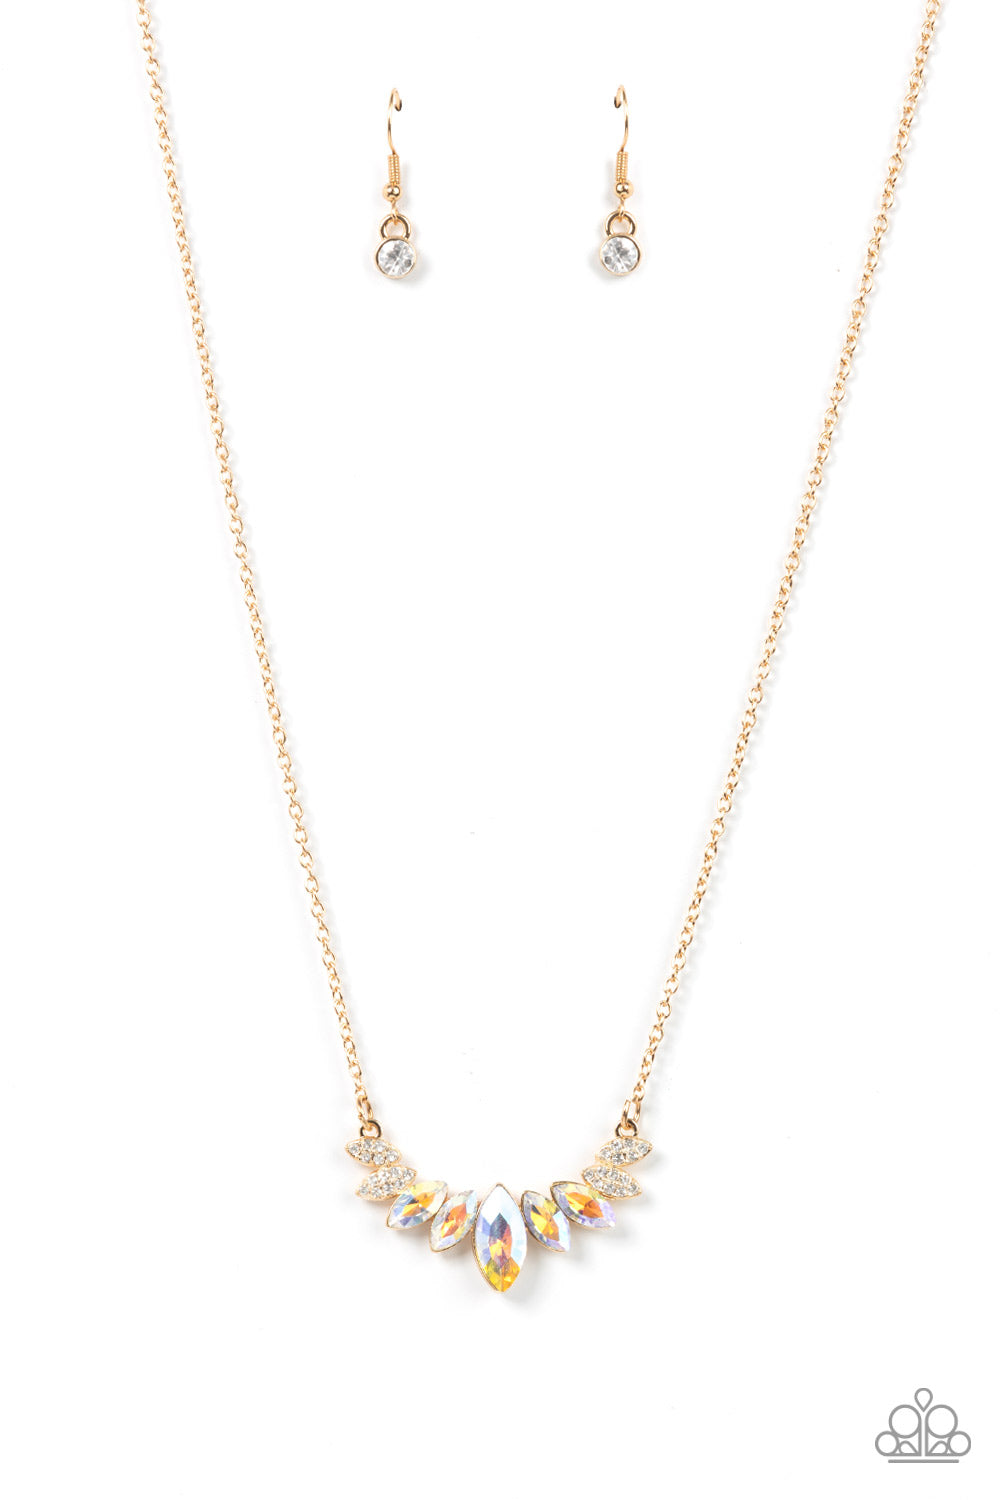 One Empire at a Time - Gold Frame, Iridescent & White Rhinestone Paparazzi Necklace & matching earrings